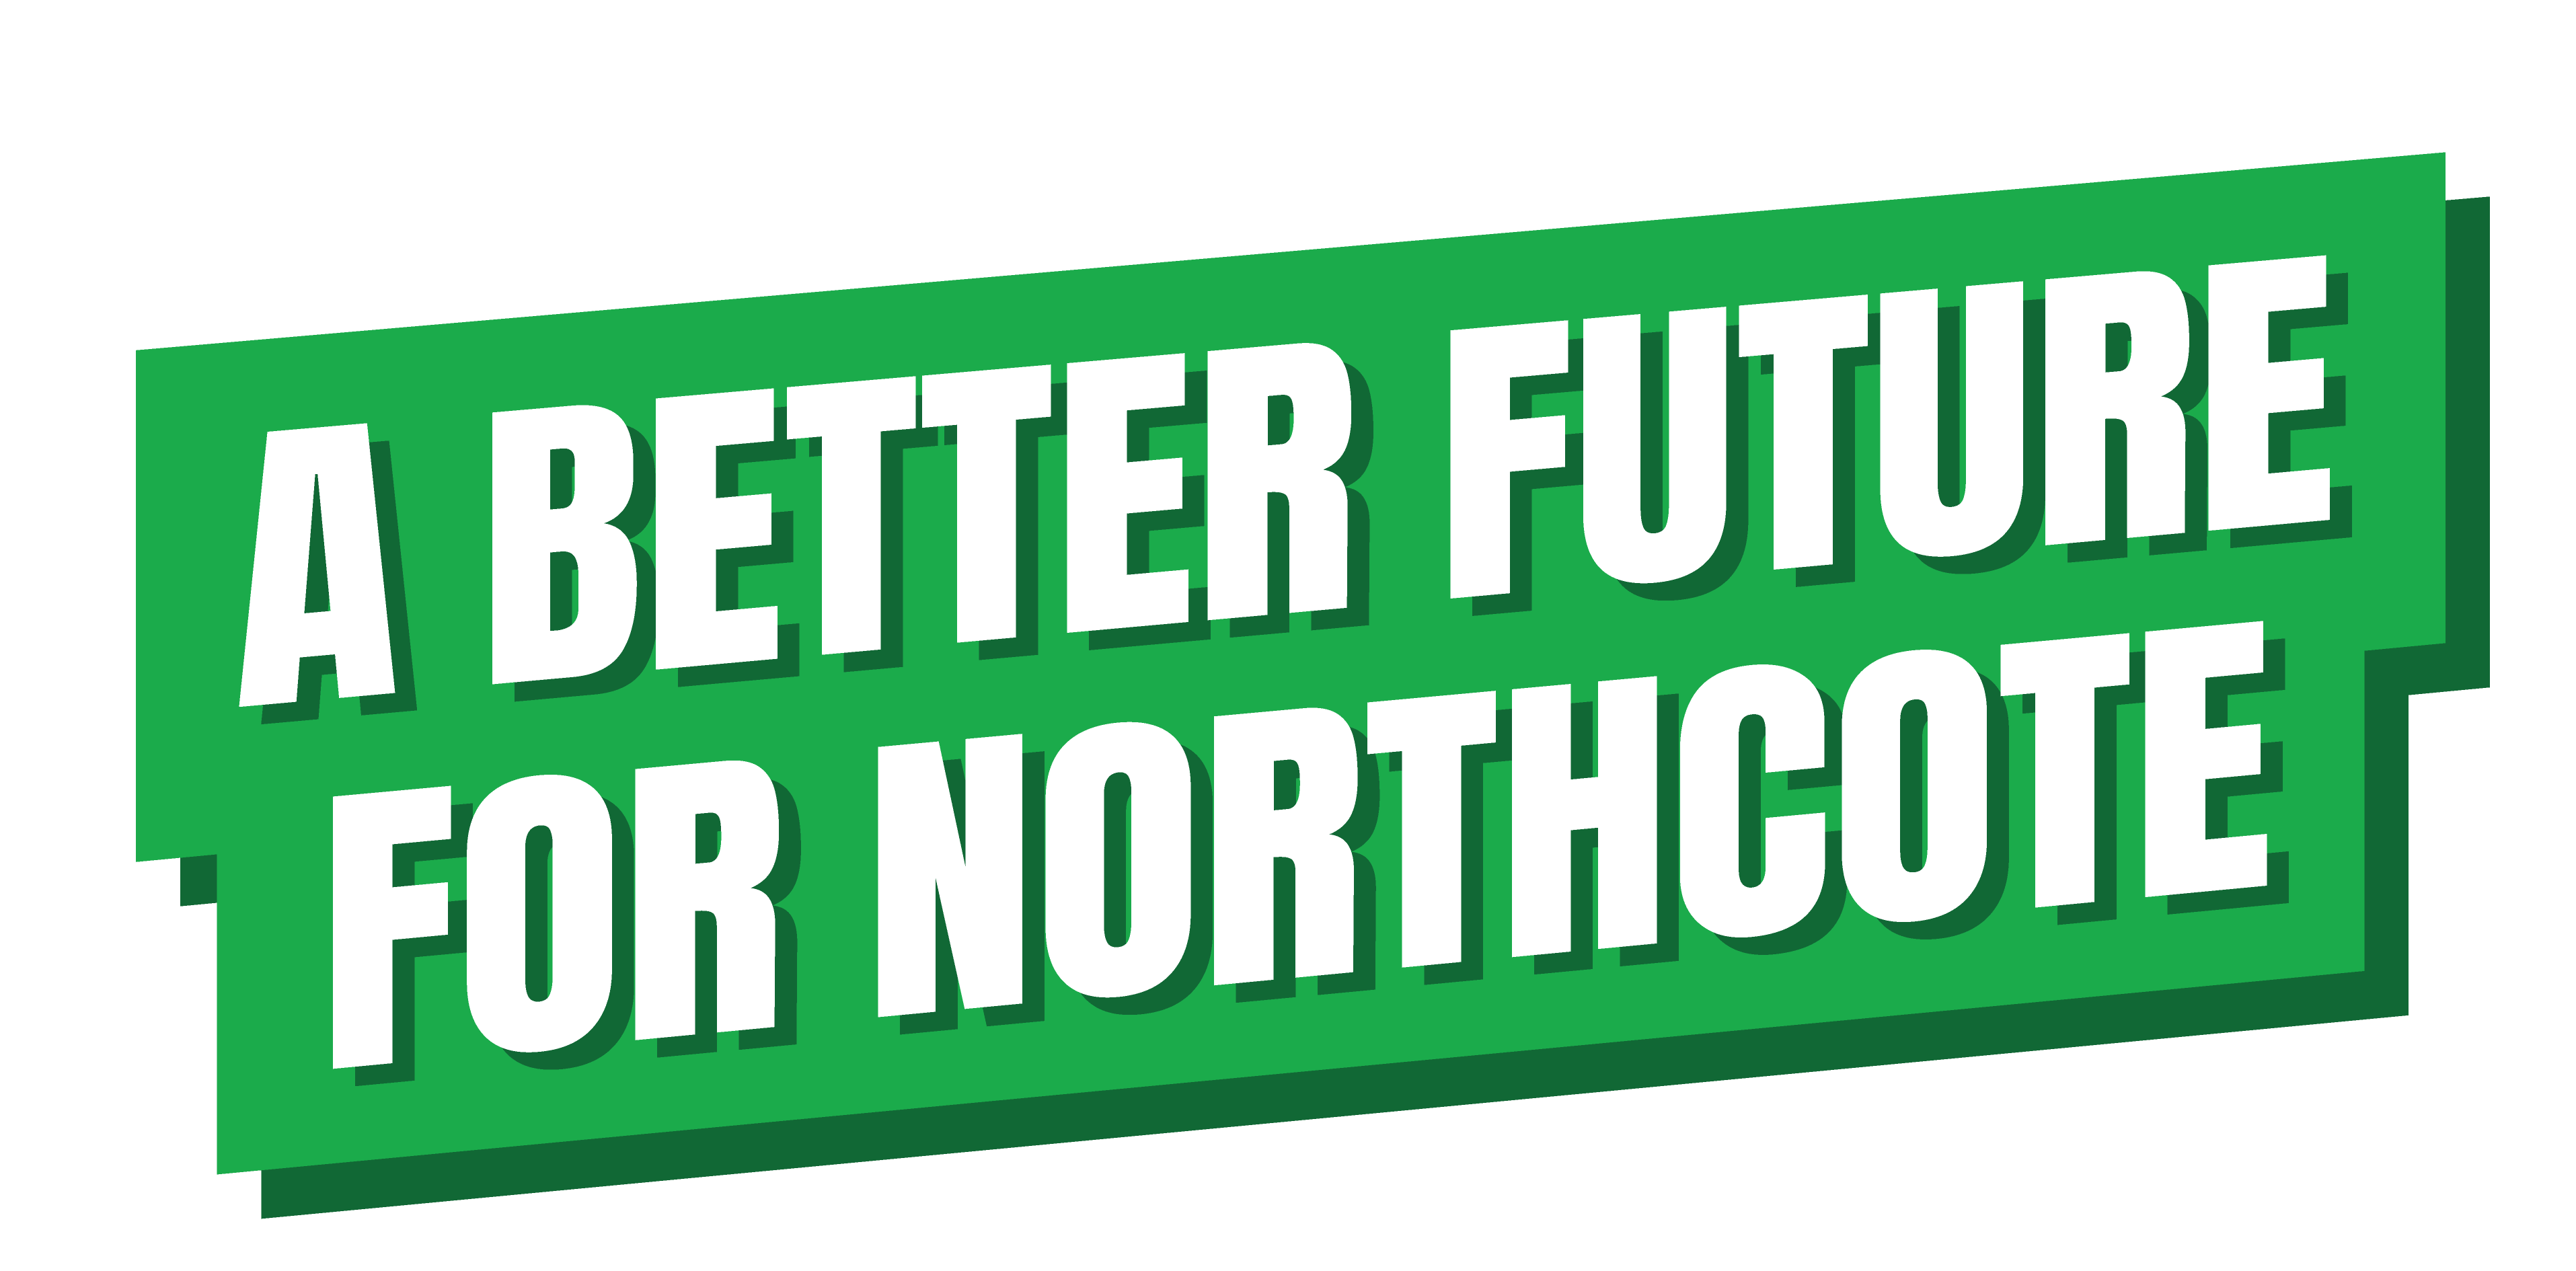 A Better Future for Northcote